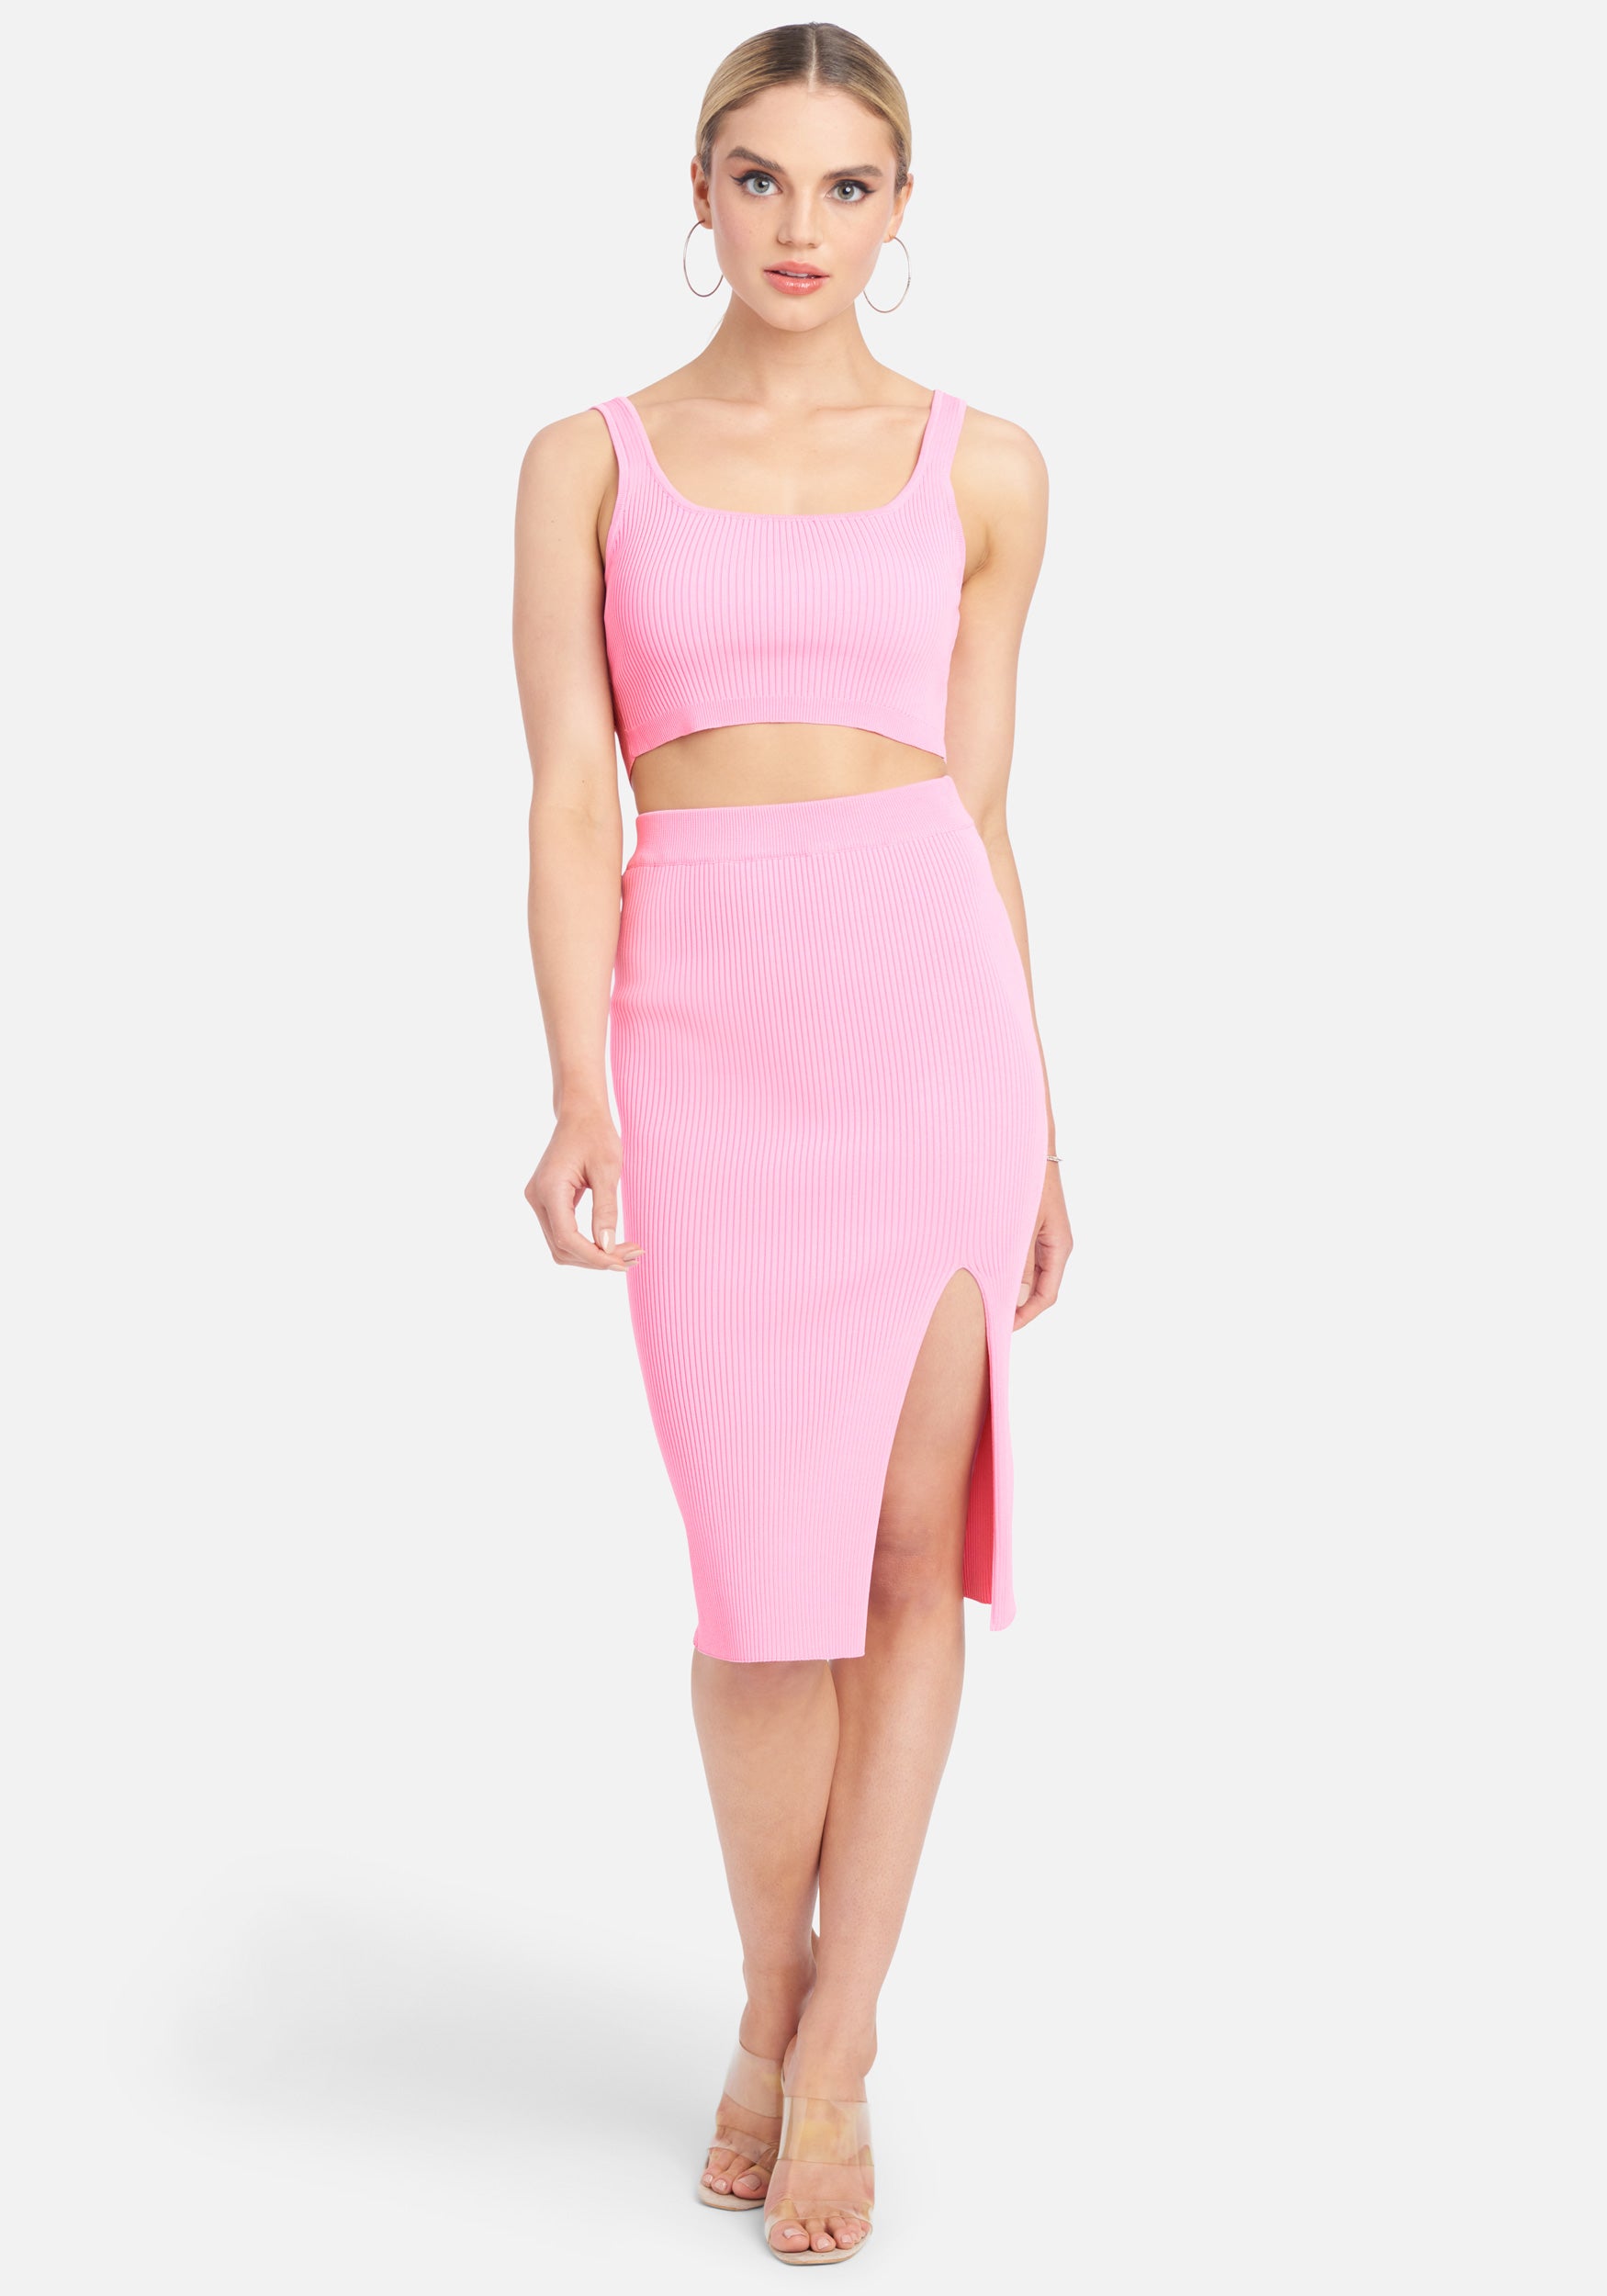 Bebe Women's Rib Two Piece Dress, Size Medium in Party Pink Viscose